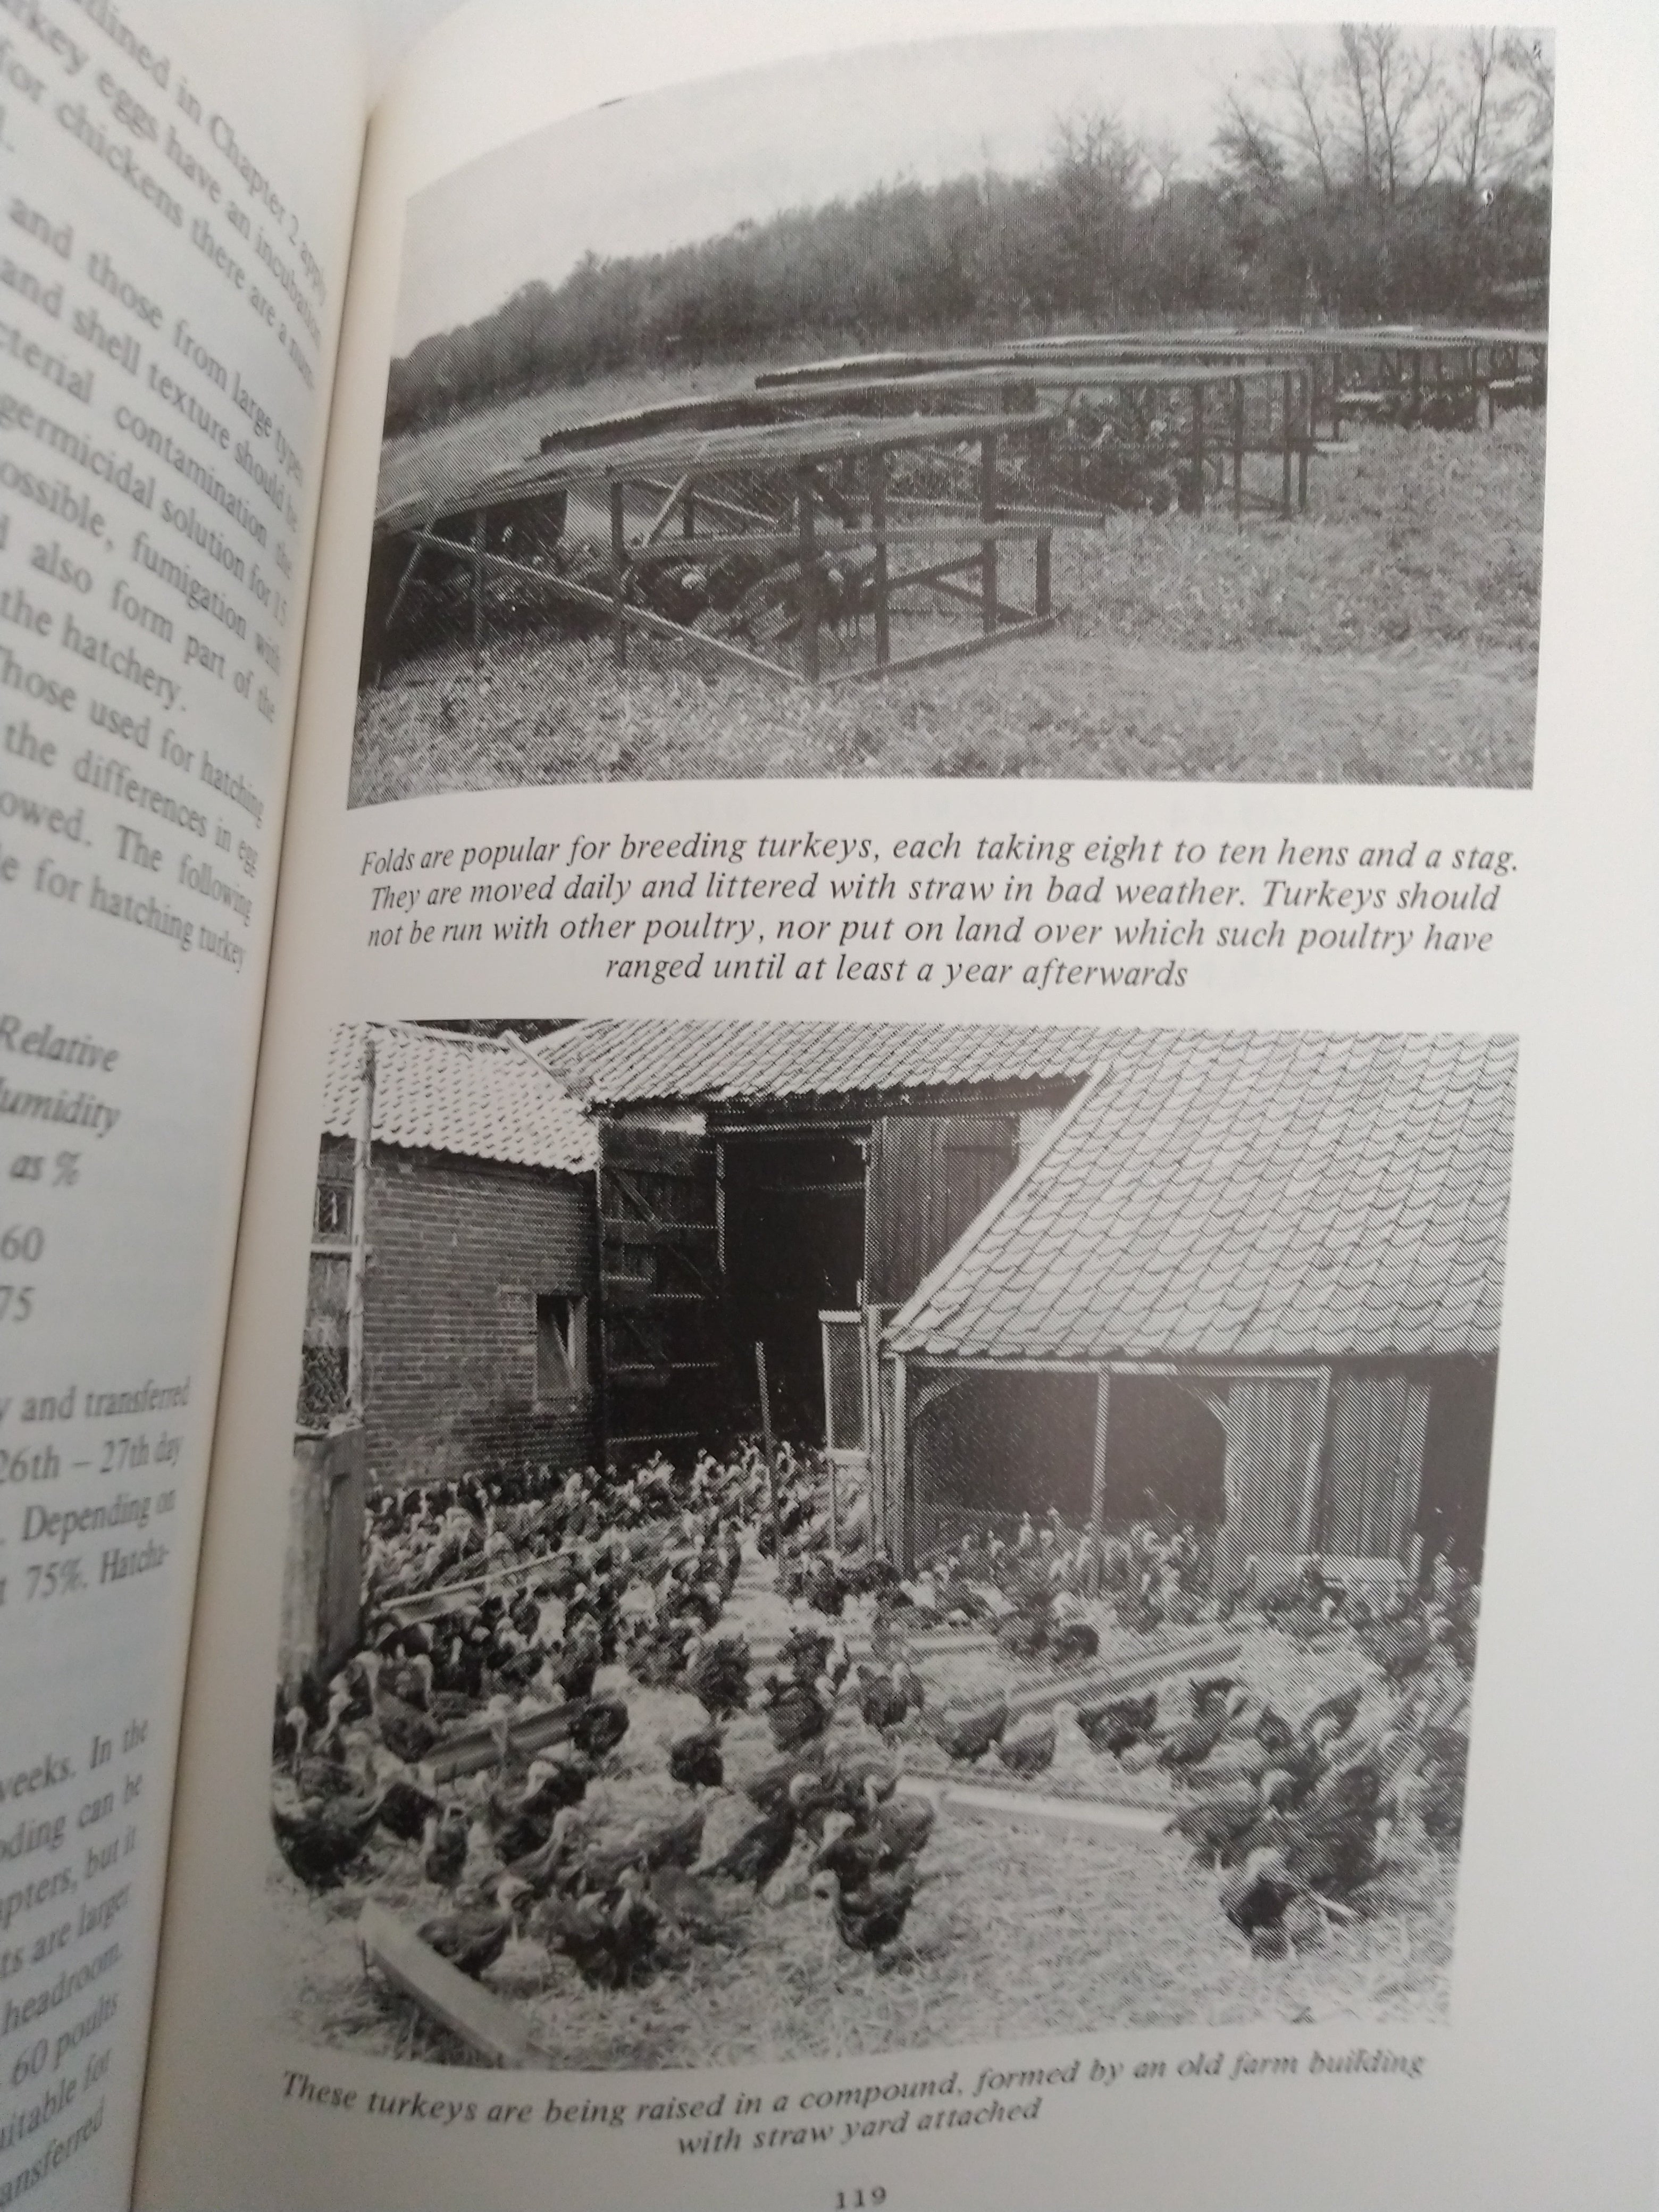 Practical Poultry Keeping by Joseph Batty